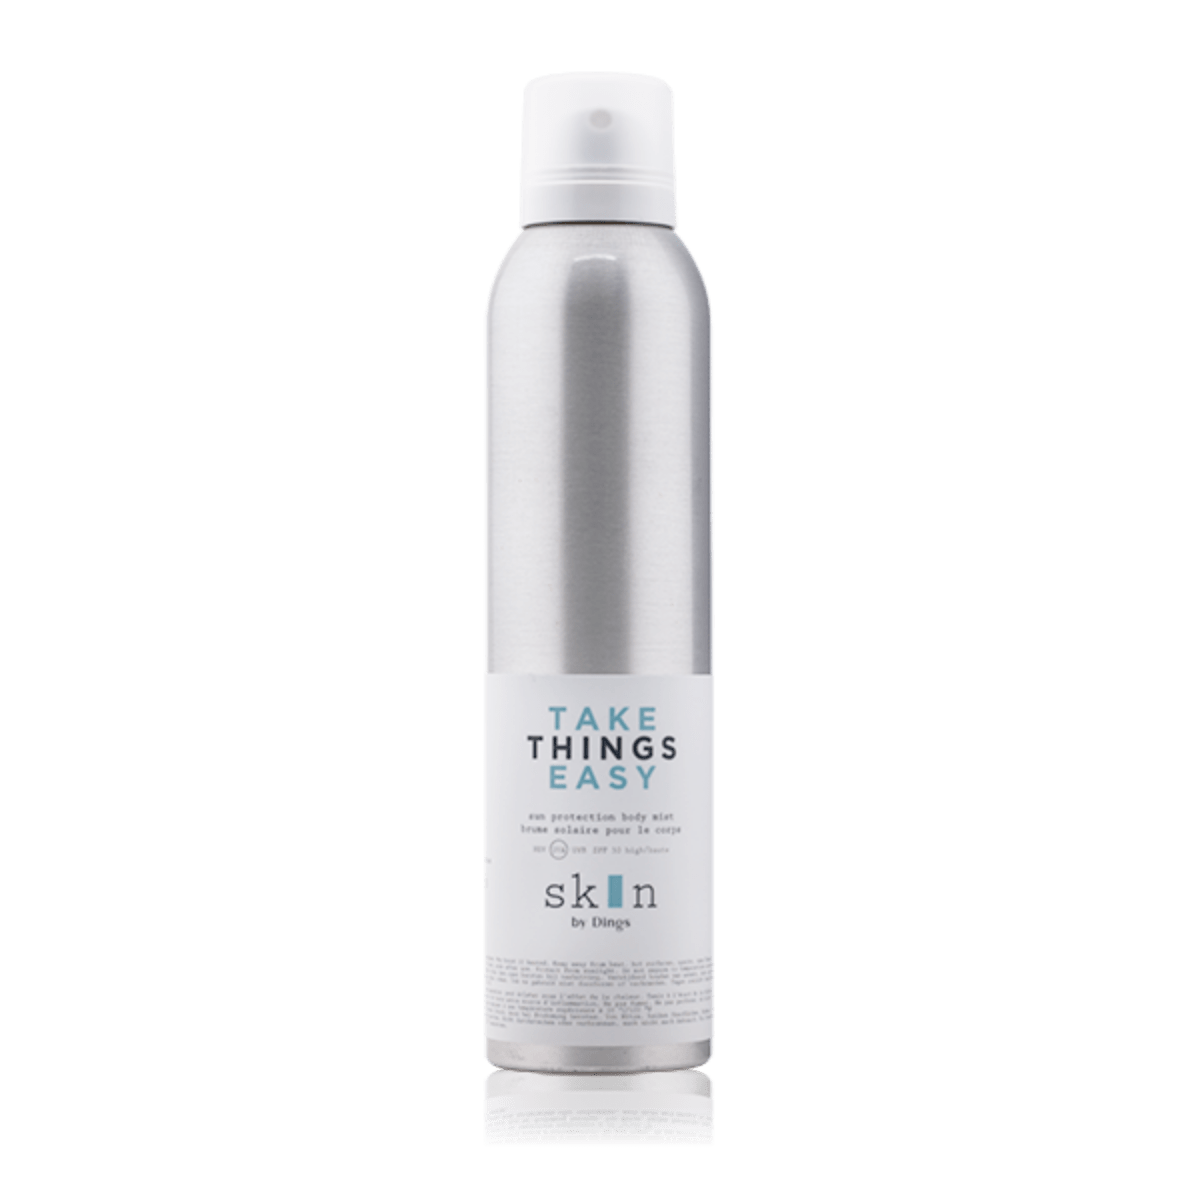 Take Things Easy: Sun protection body mist SPF 30 - The Natural Beauty Club